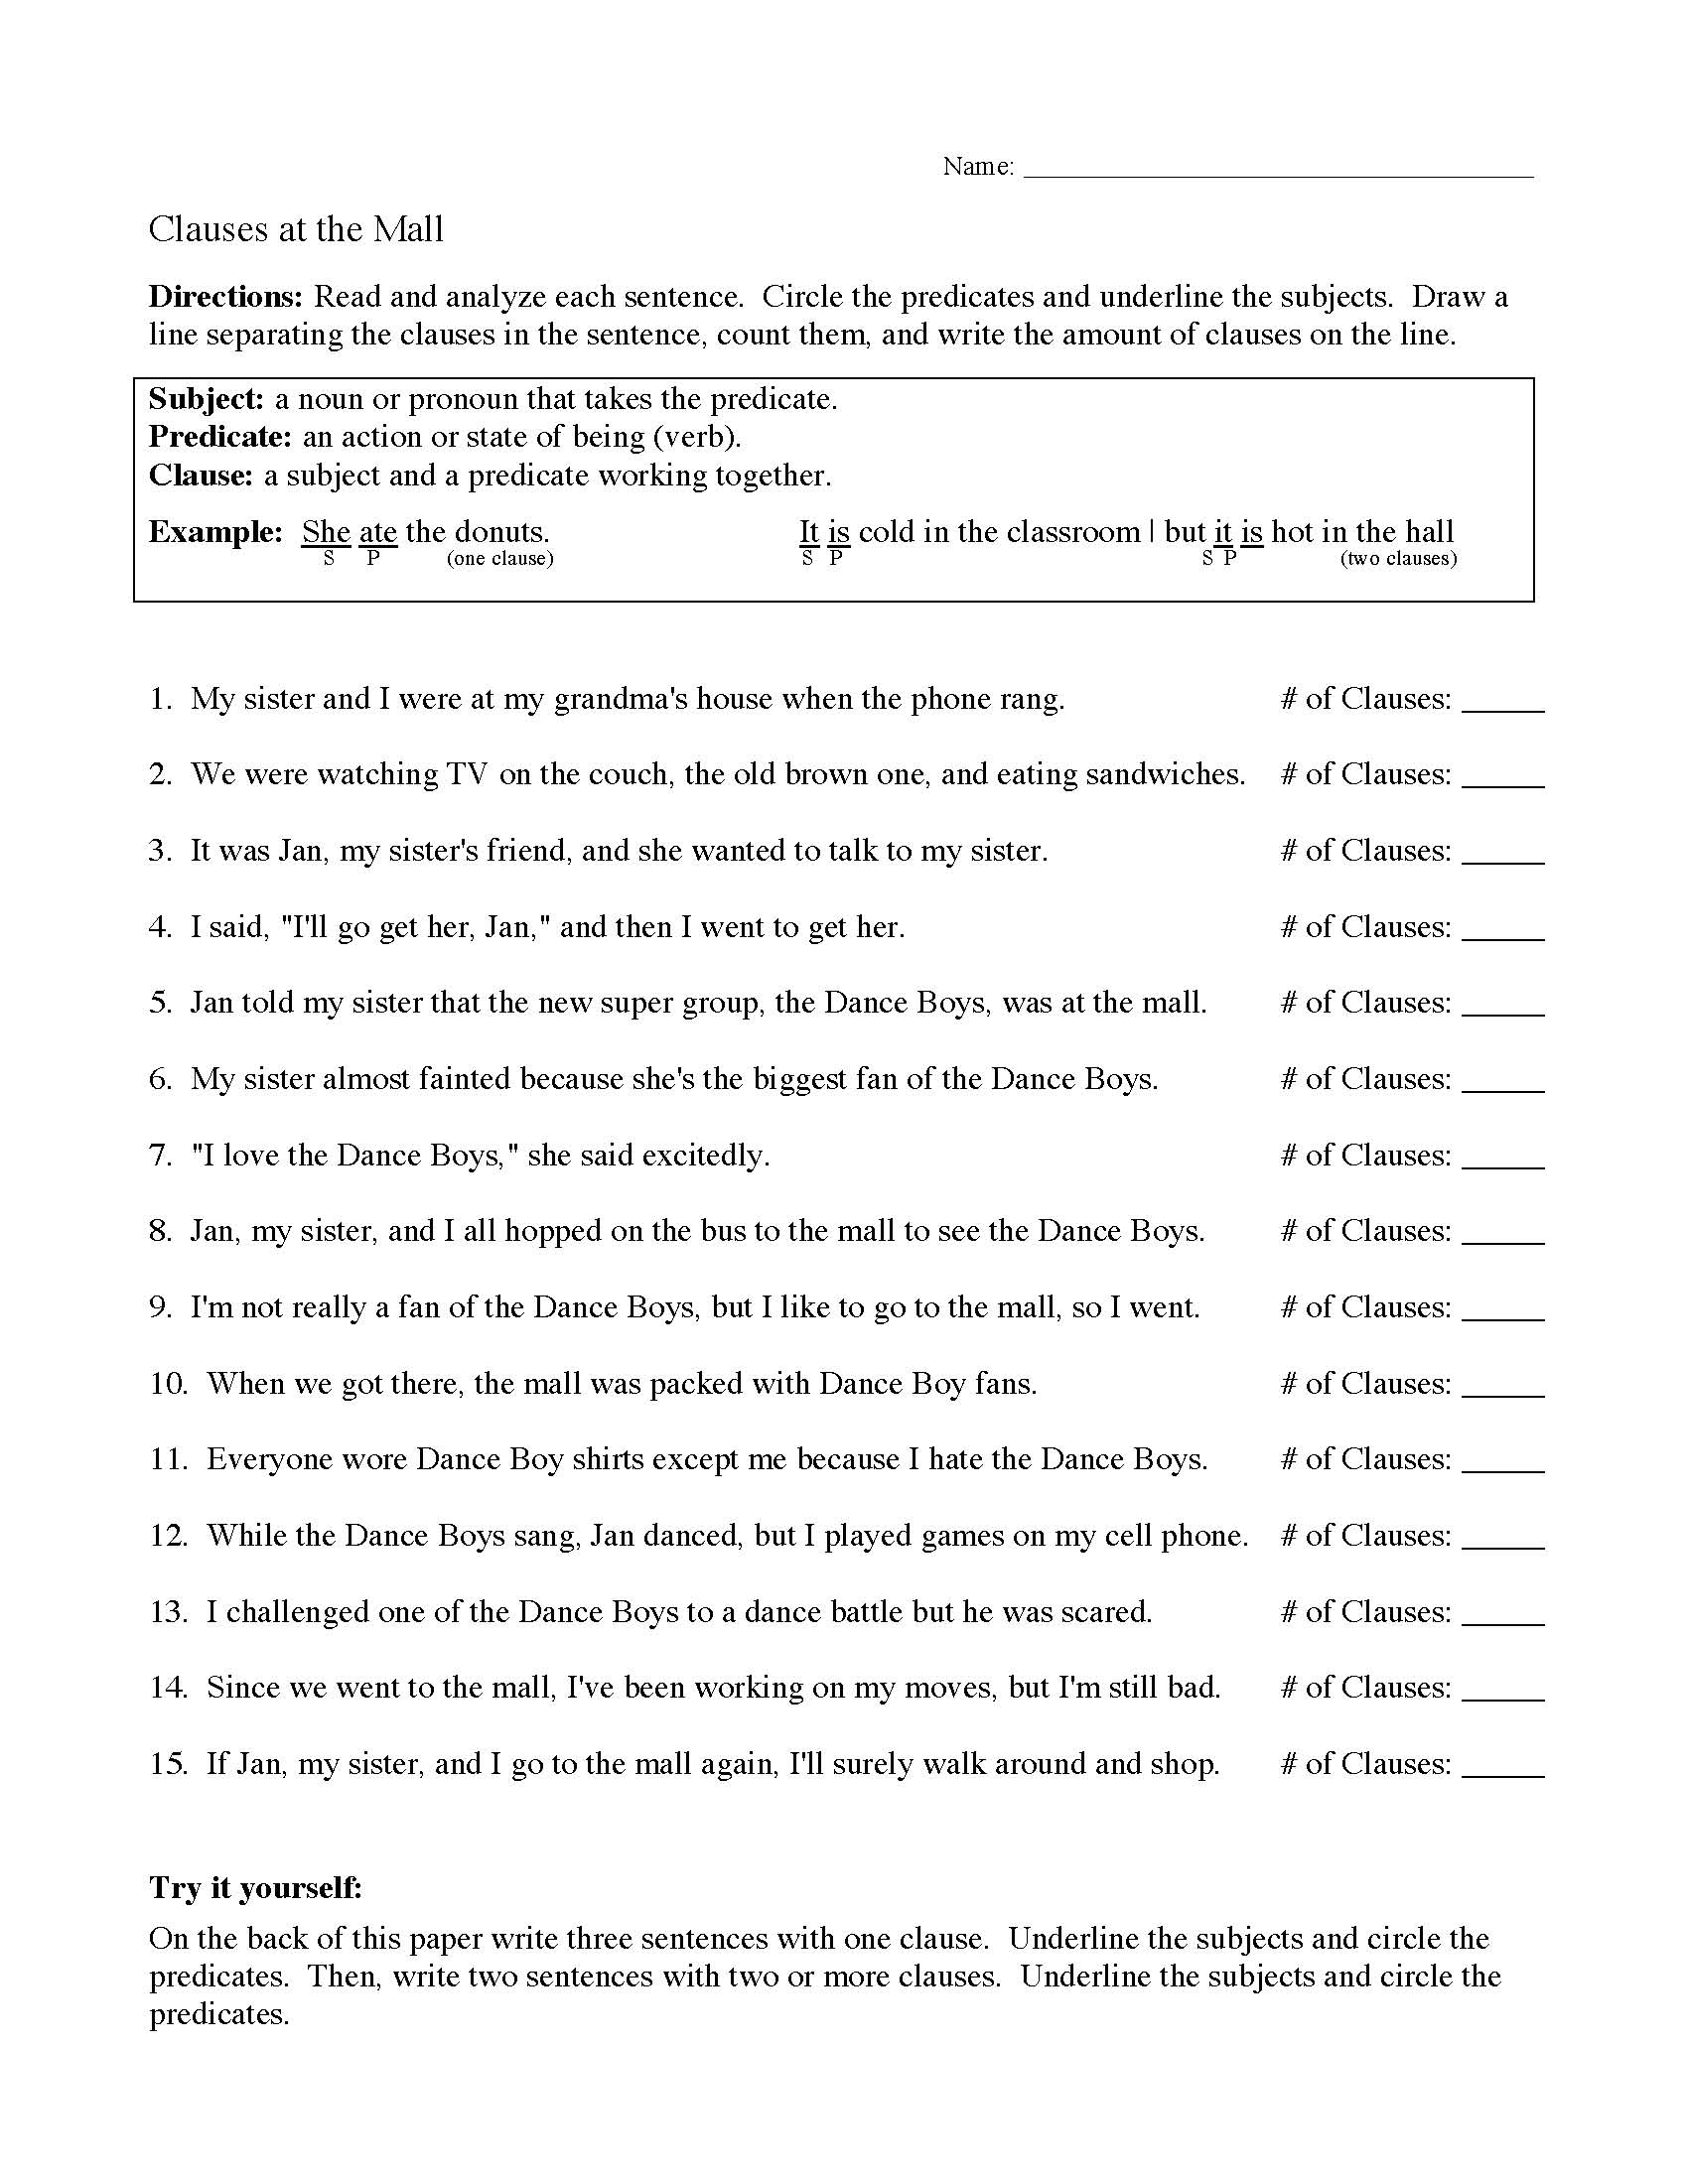 clauses-worksheet-preview